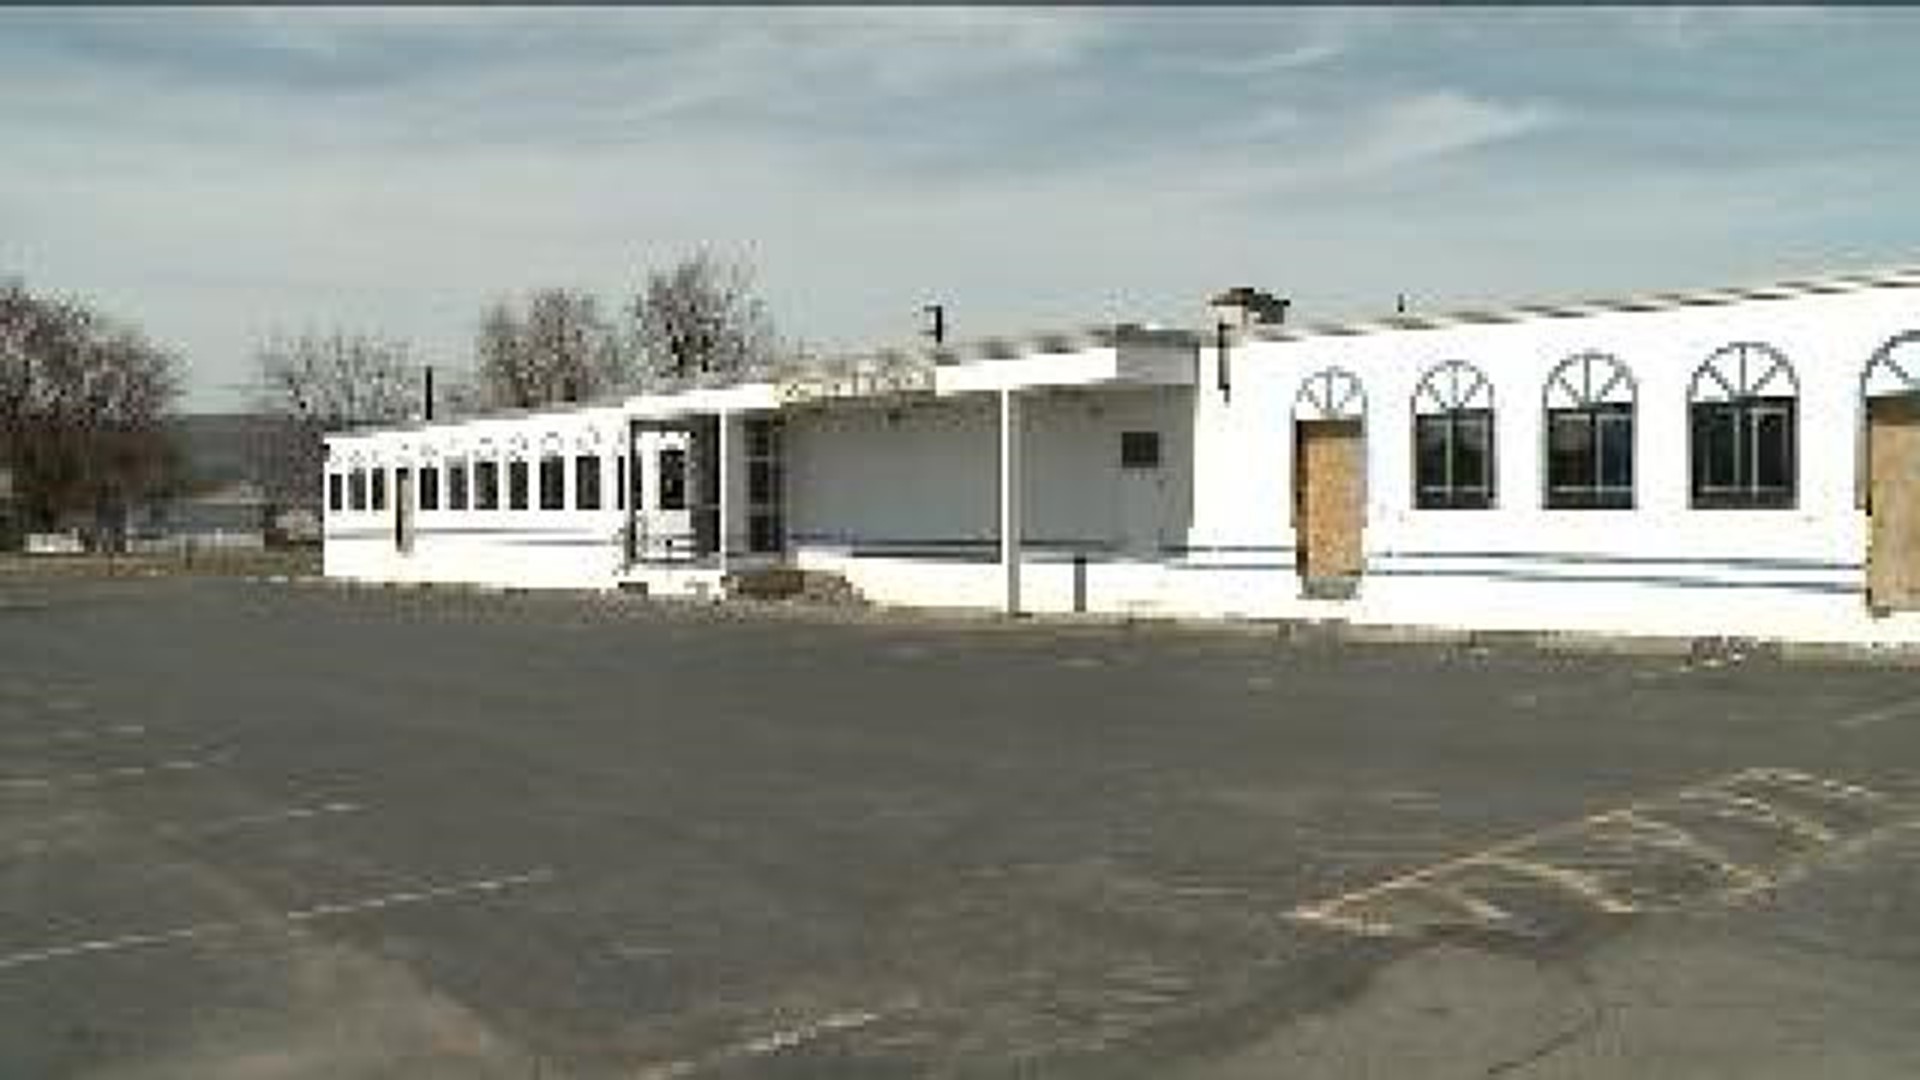 110-Year-Old Business Moving to Empty Building in Scranton